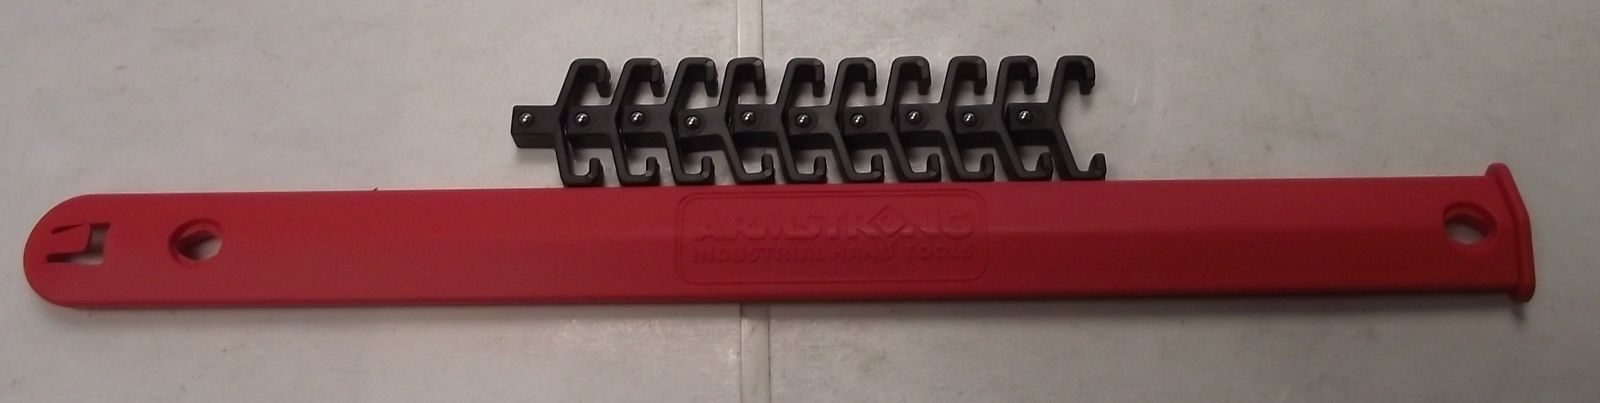 Armstrong 16-836-1/4 1/4" Drive Socket Rail Red 10" 10 Positions USA